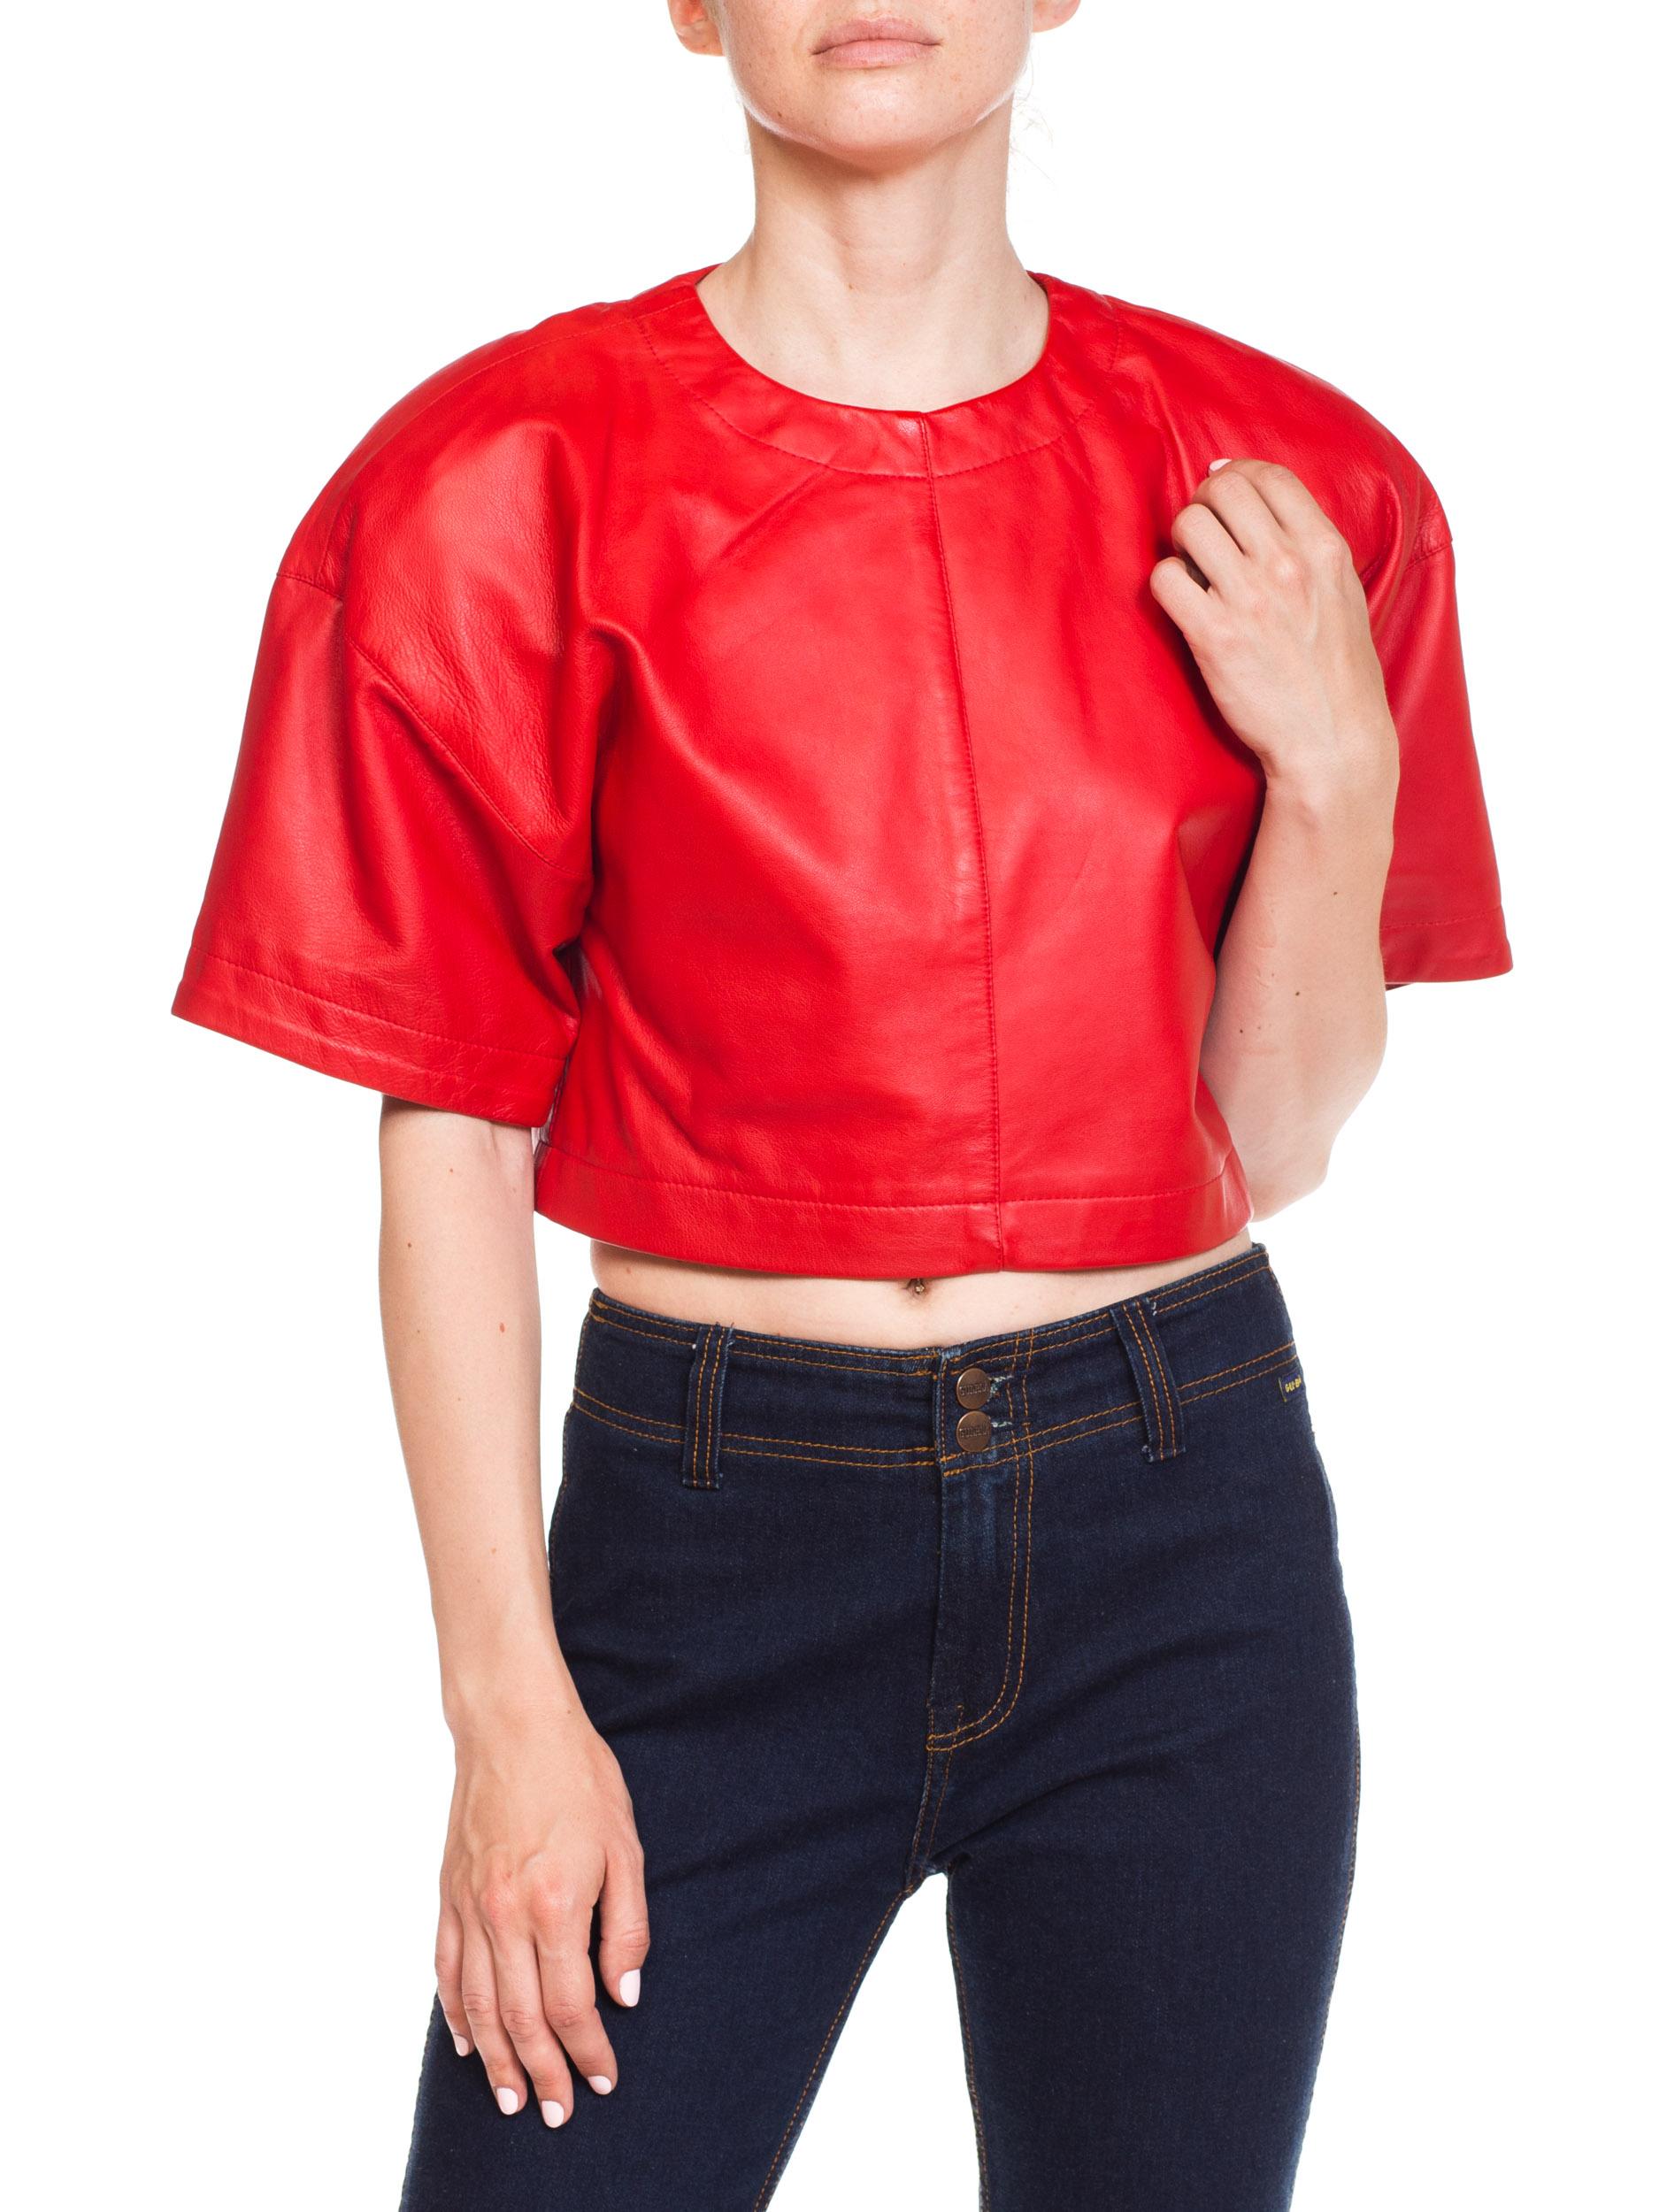 1980s Red Leather Oversized Crop Top 5